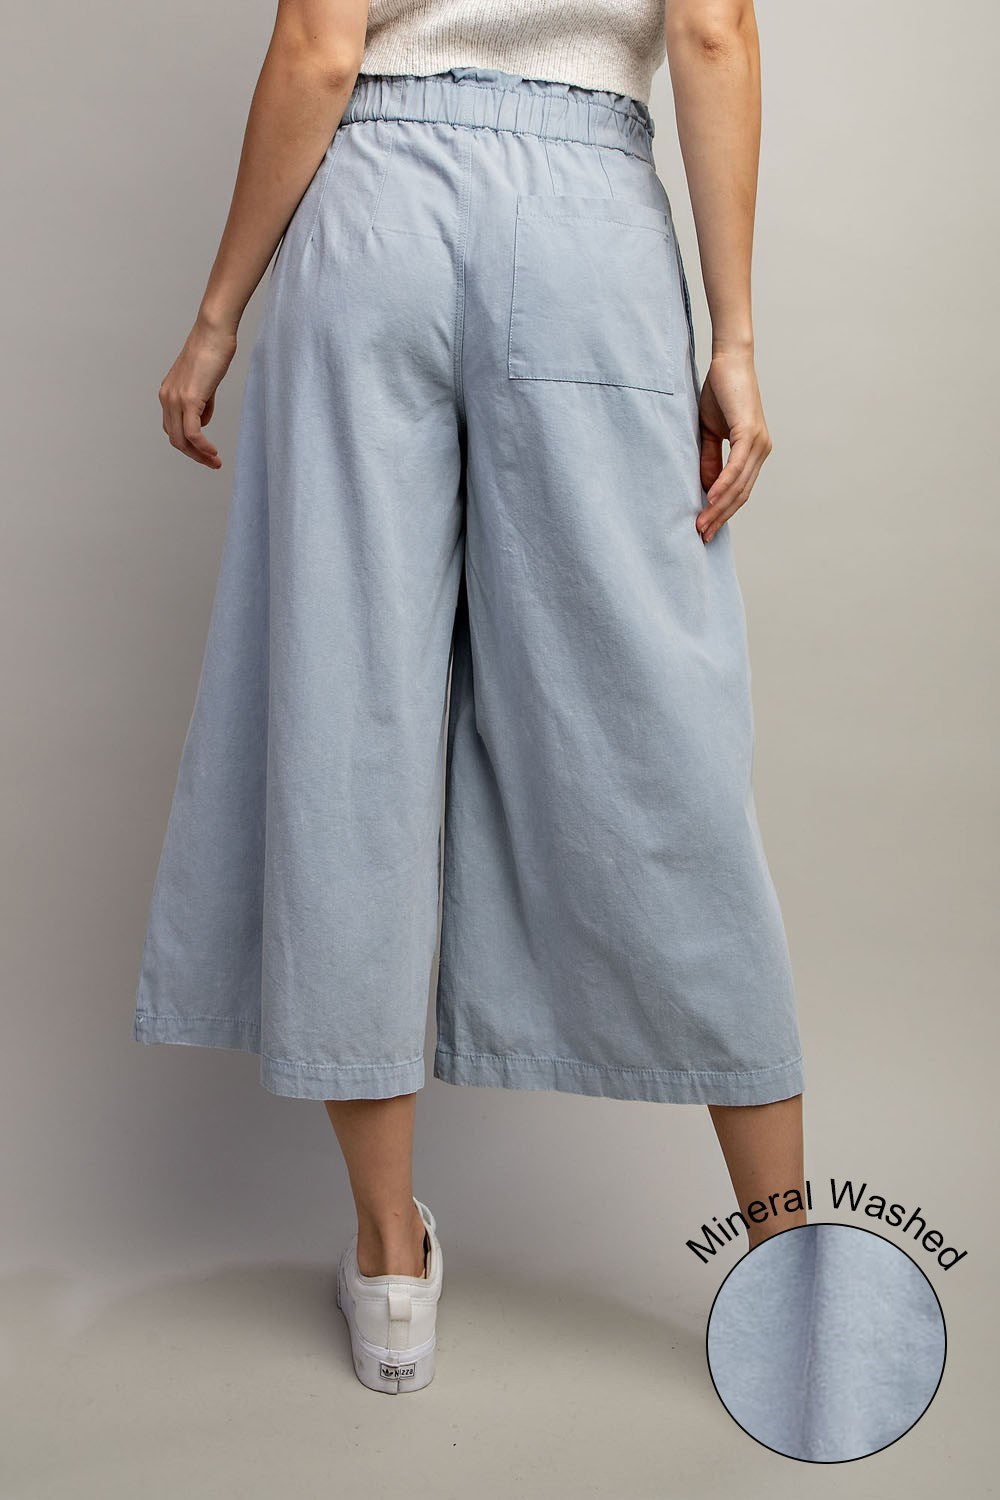 Daydreaming Wide Leg Cropped Pants 3 Colors (Small to Large)